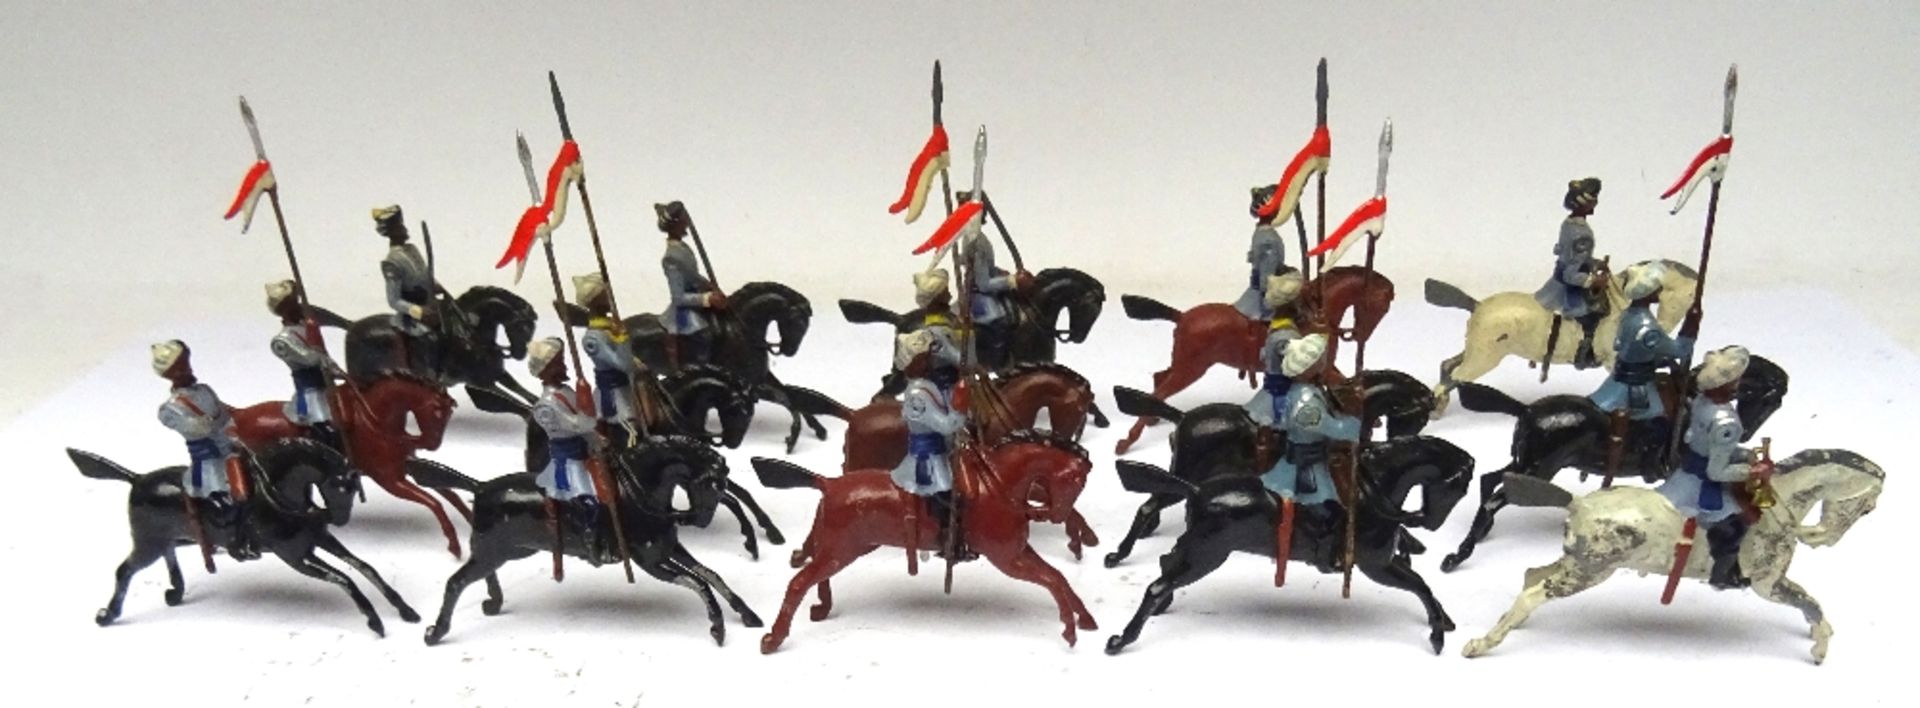 Britains from set 64, 2nd Madras Lancers